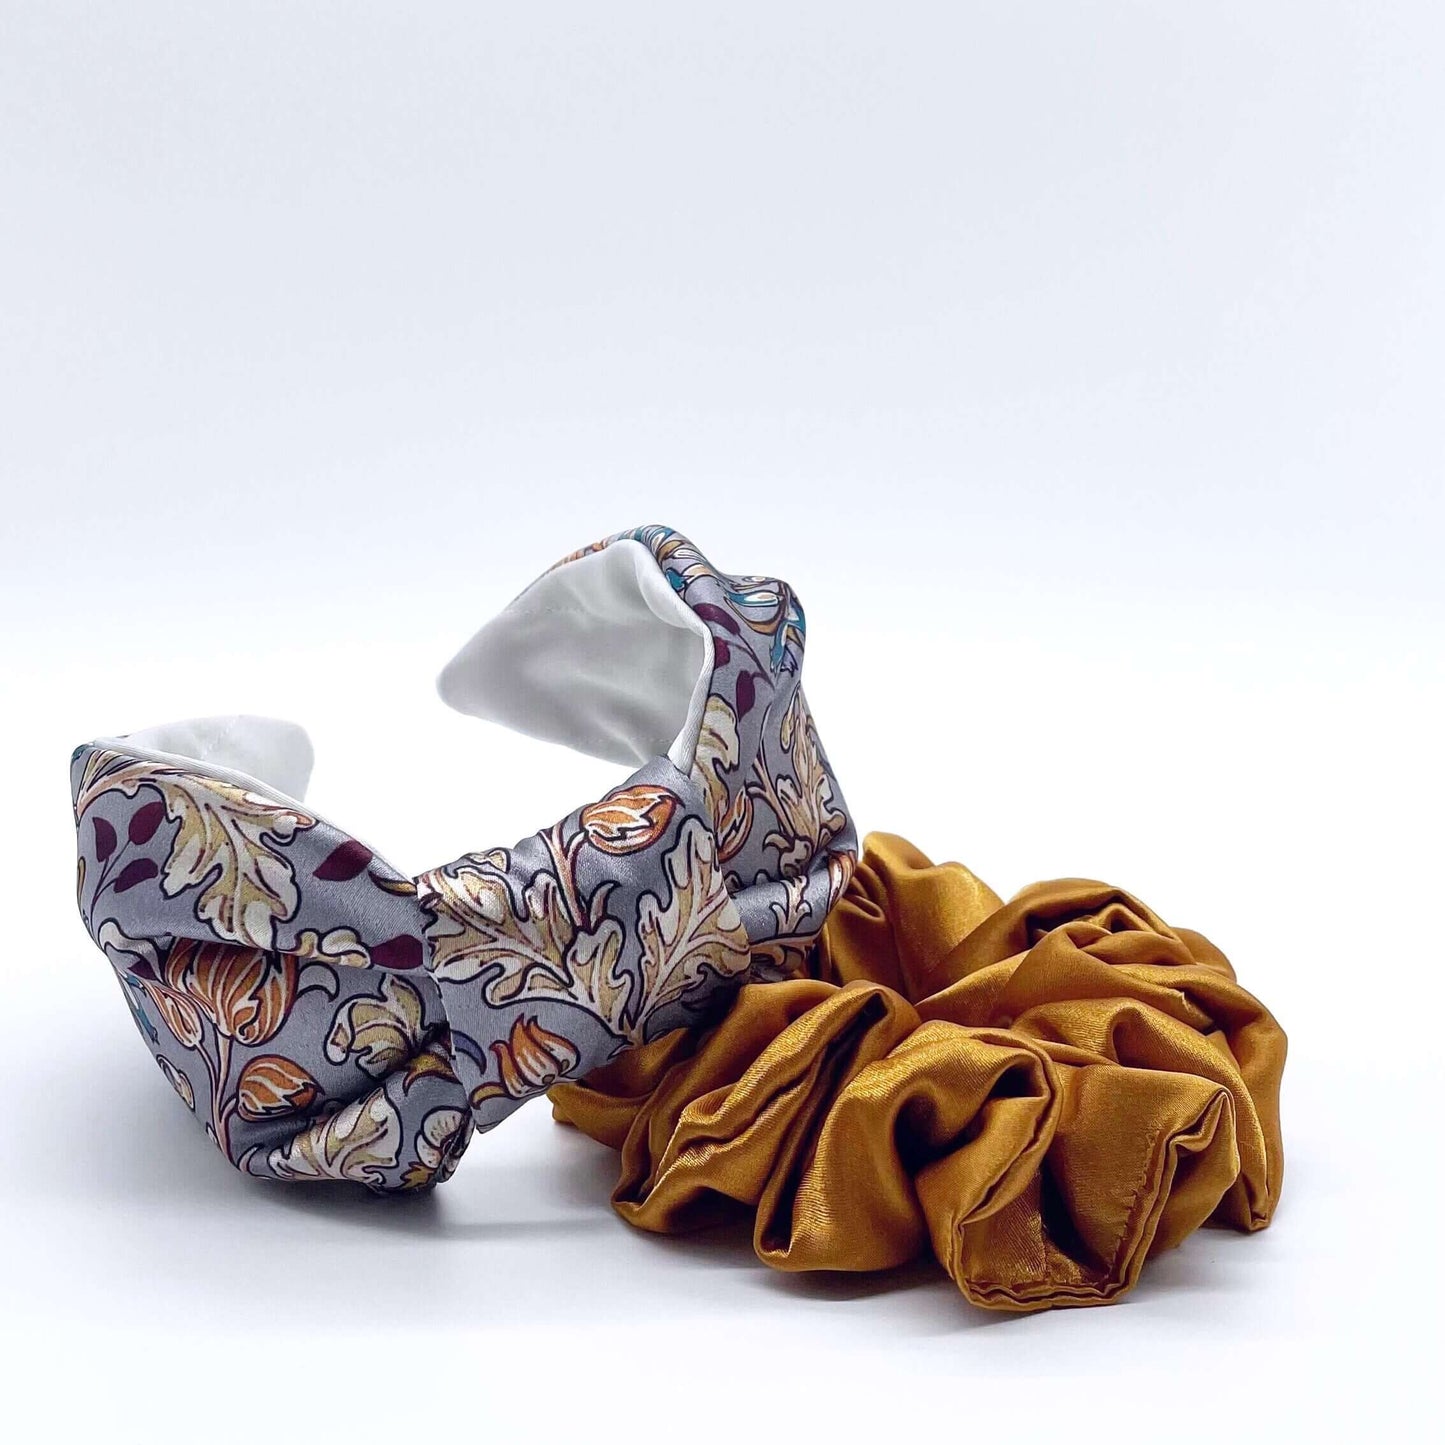 A beautiful grey, William Morris-inspired, patterned knot headband with a gold, satin scrunchie.